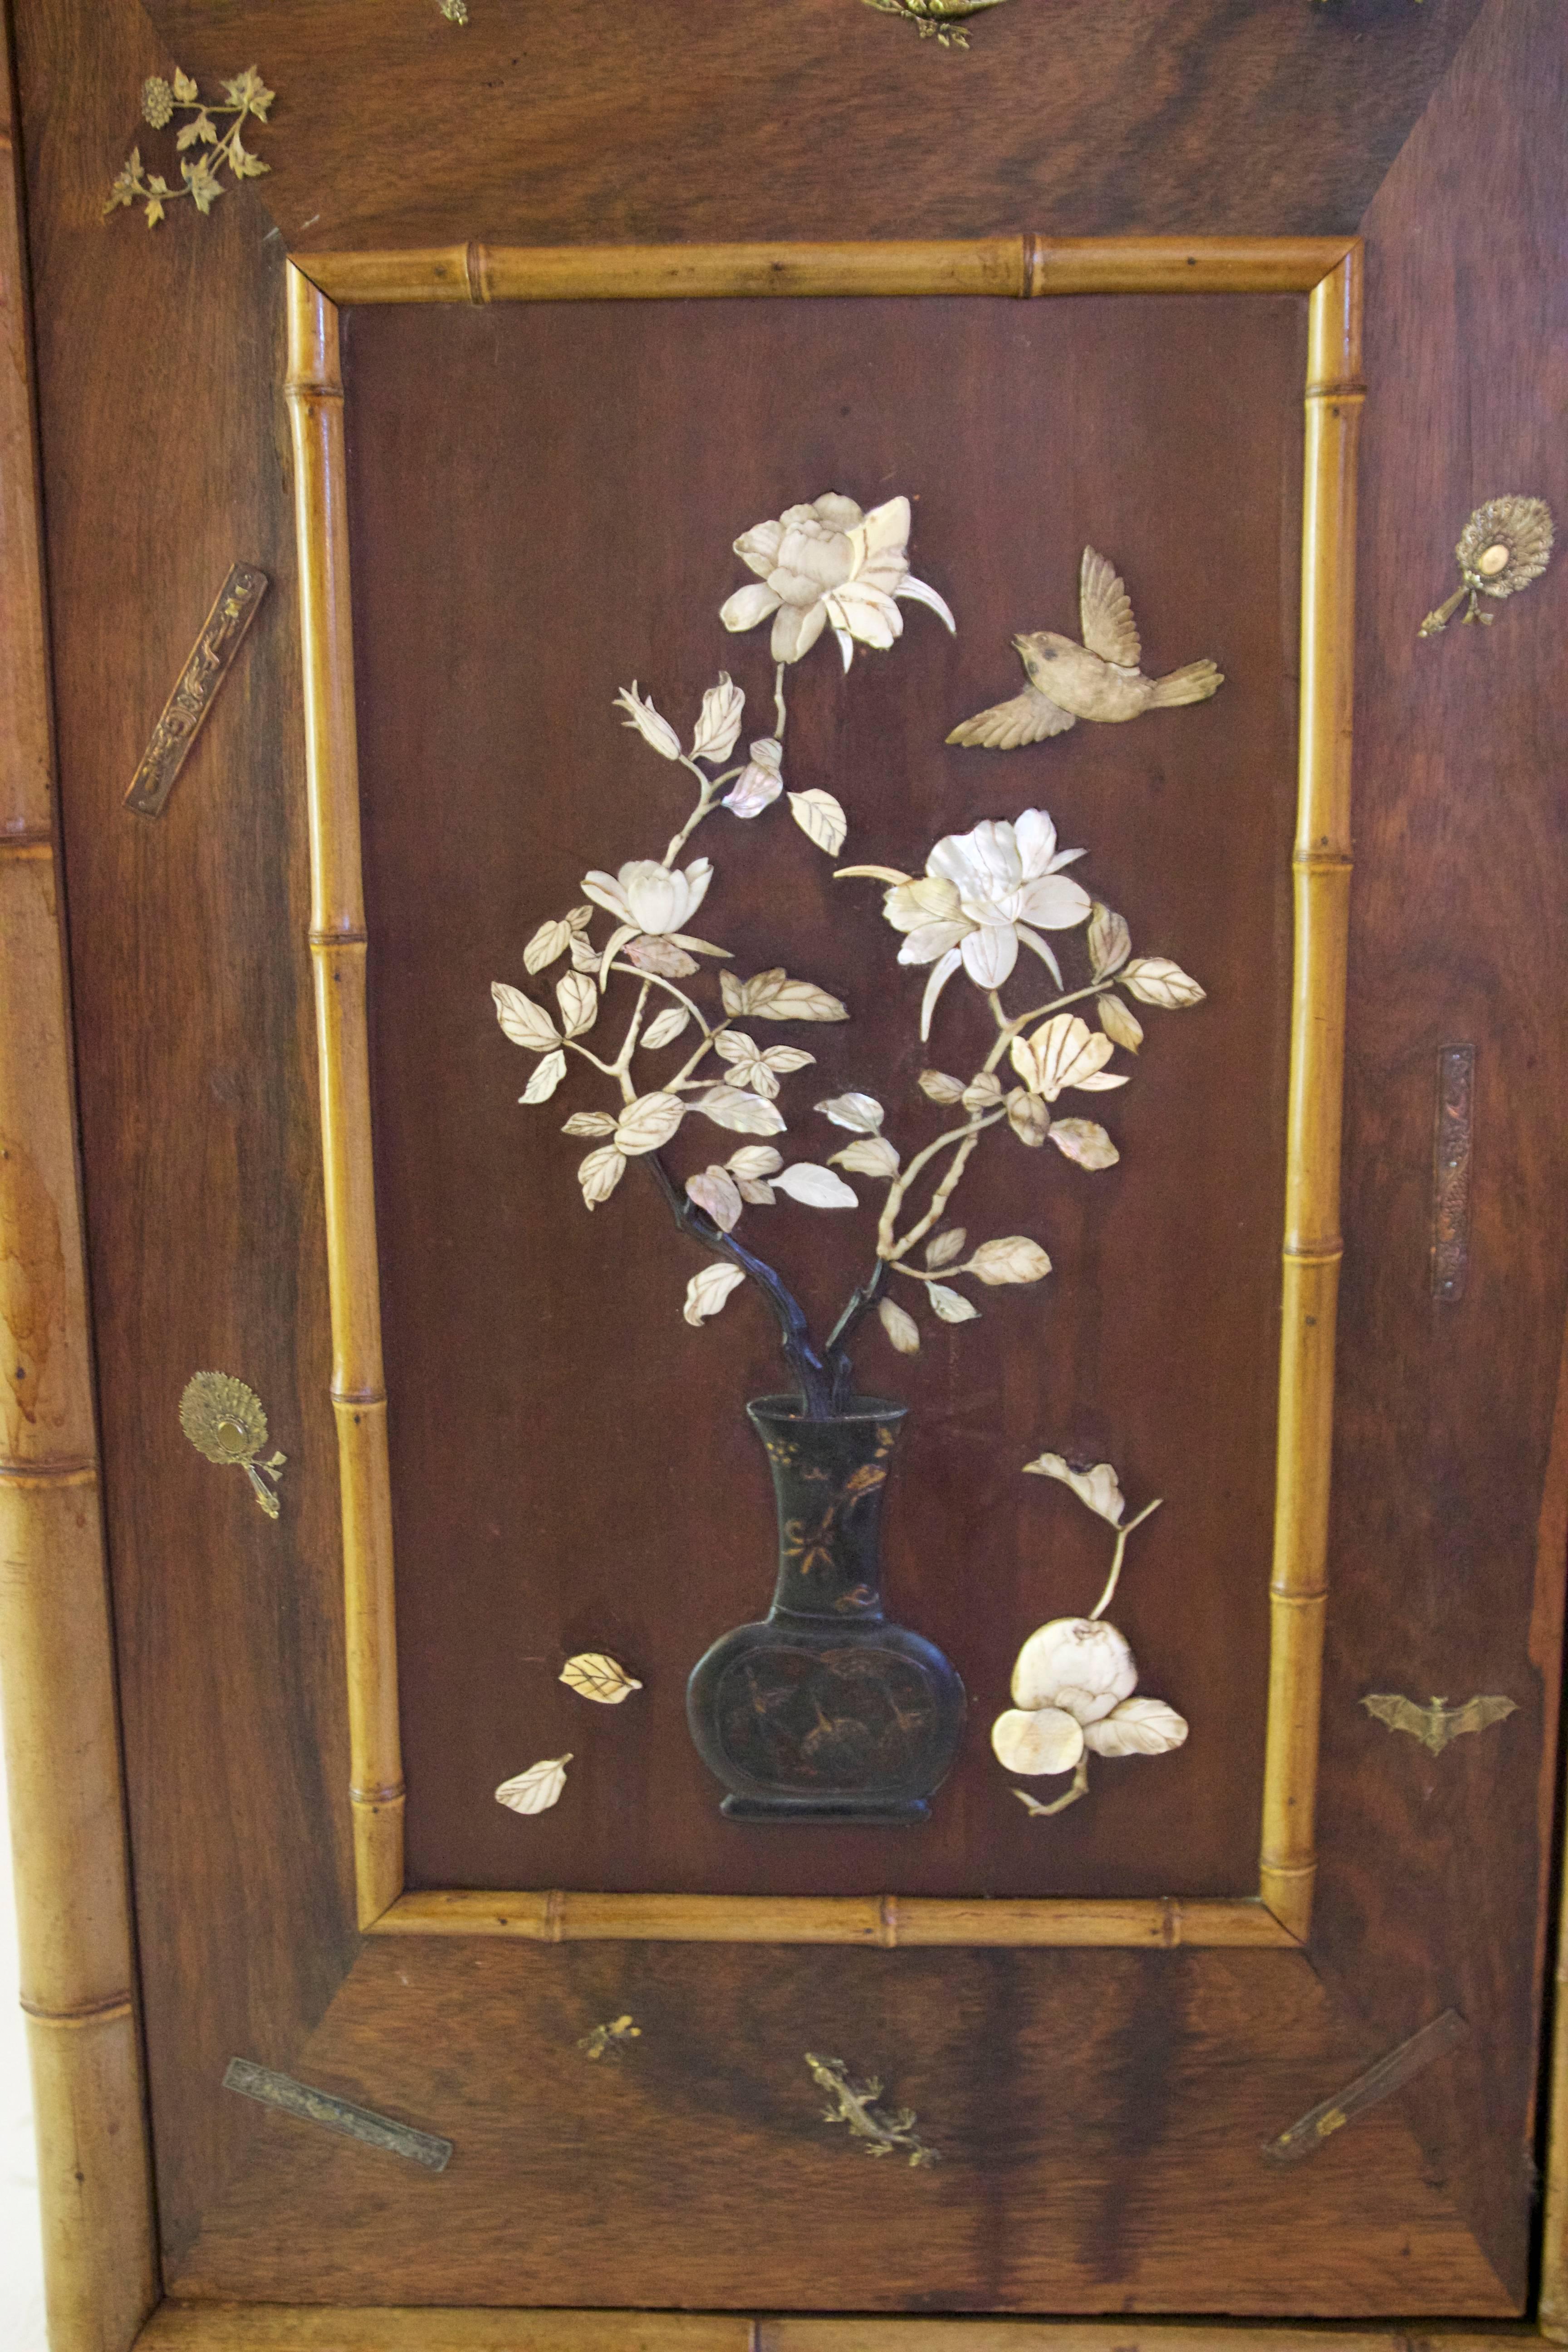 Cabinet
Bamboo, lacquer,
mother-of-pearl inlays and bronze subjects,
Some gaps due to age,
circa 1900, France.
Measure: Height 1m22, width 1m40, depth 40 cm.